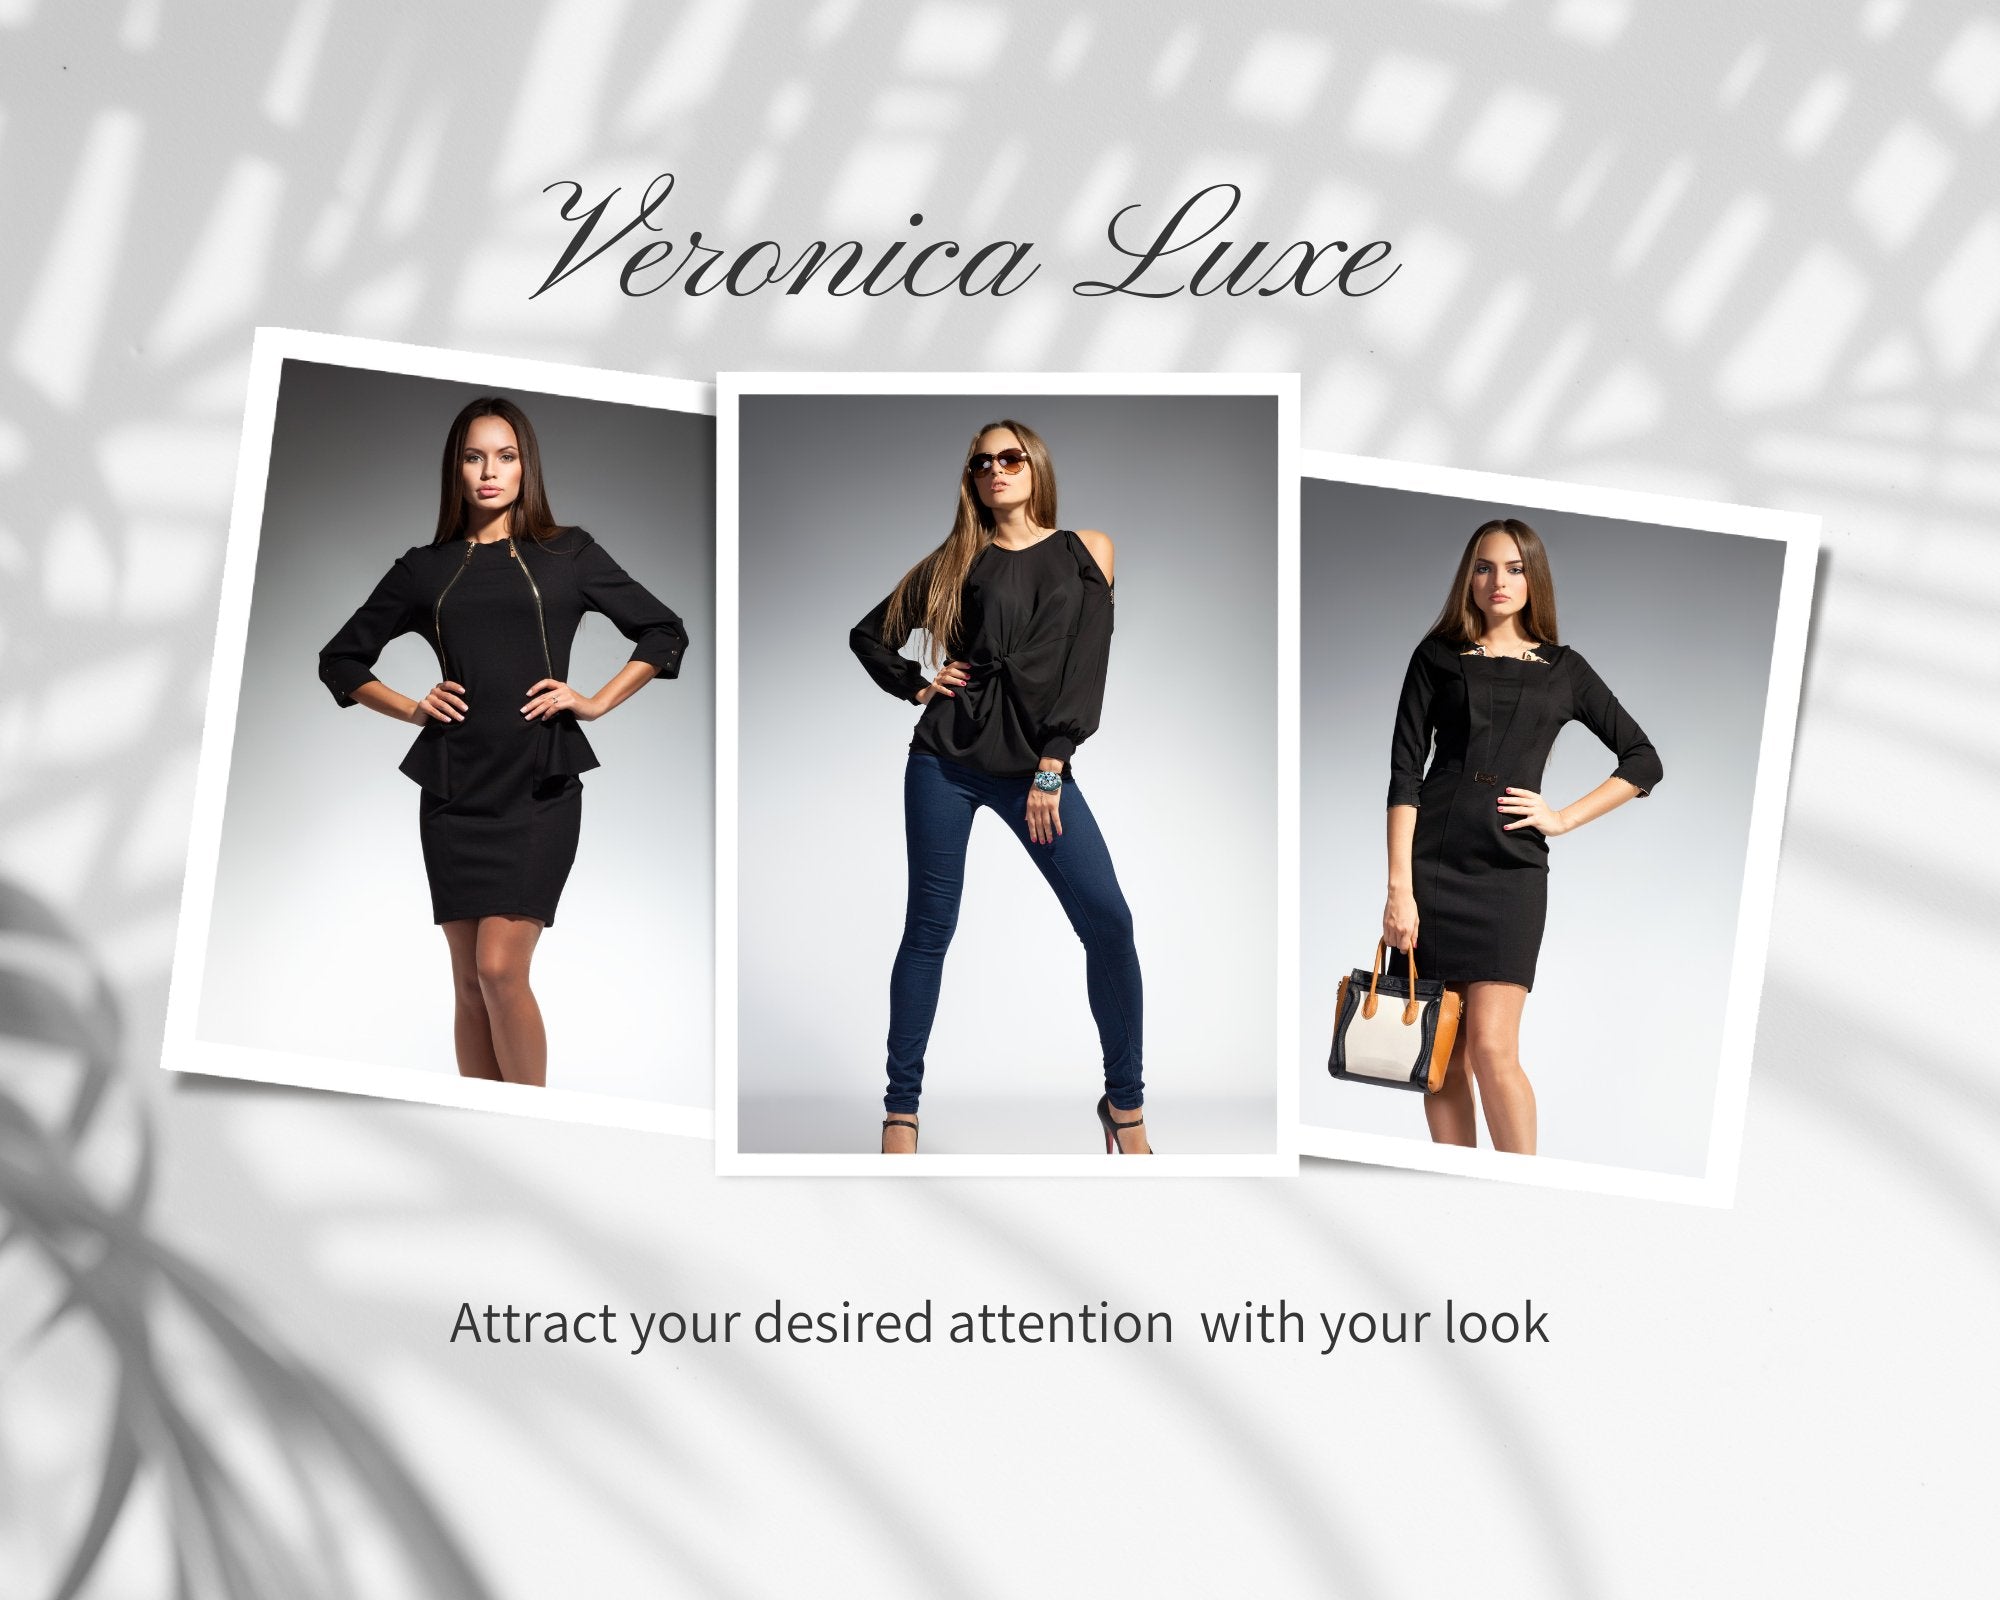 Choosing the right wardrobe based on your mood - Veronica Luxe